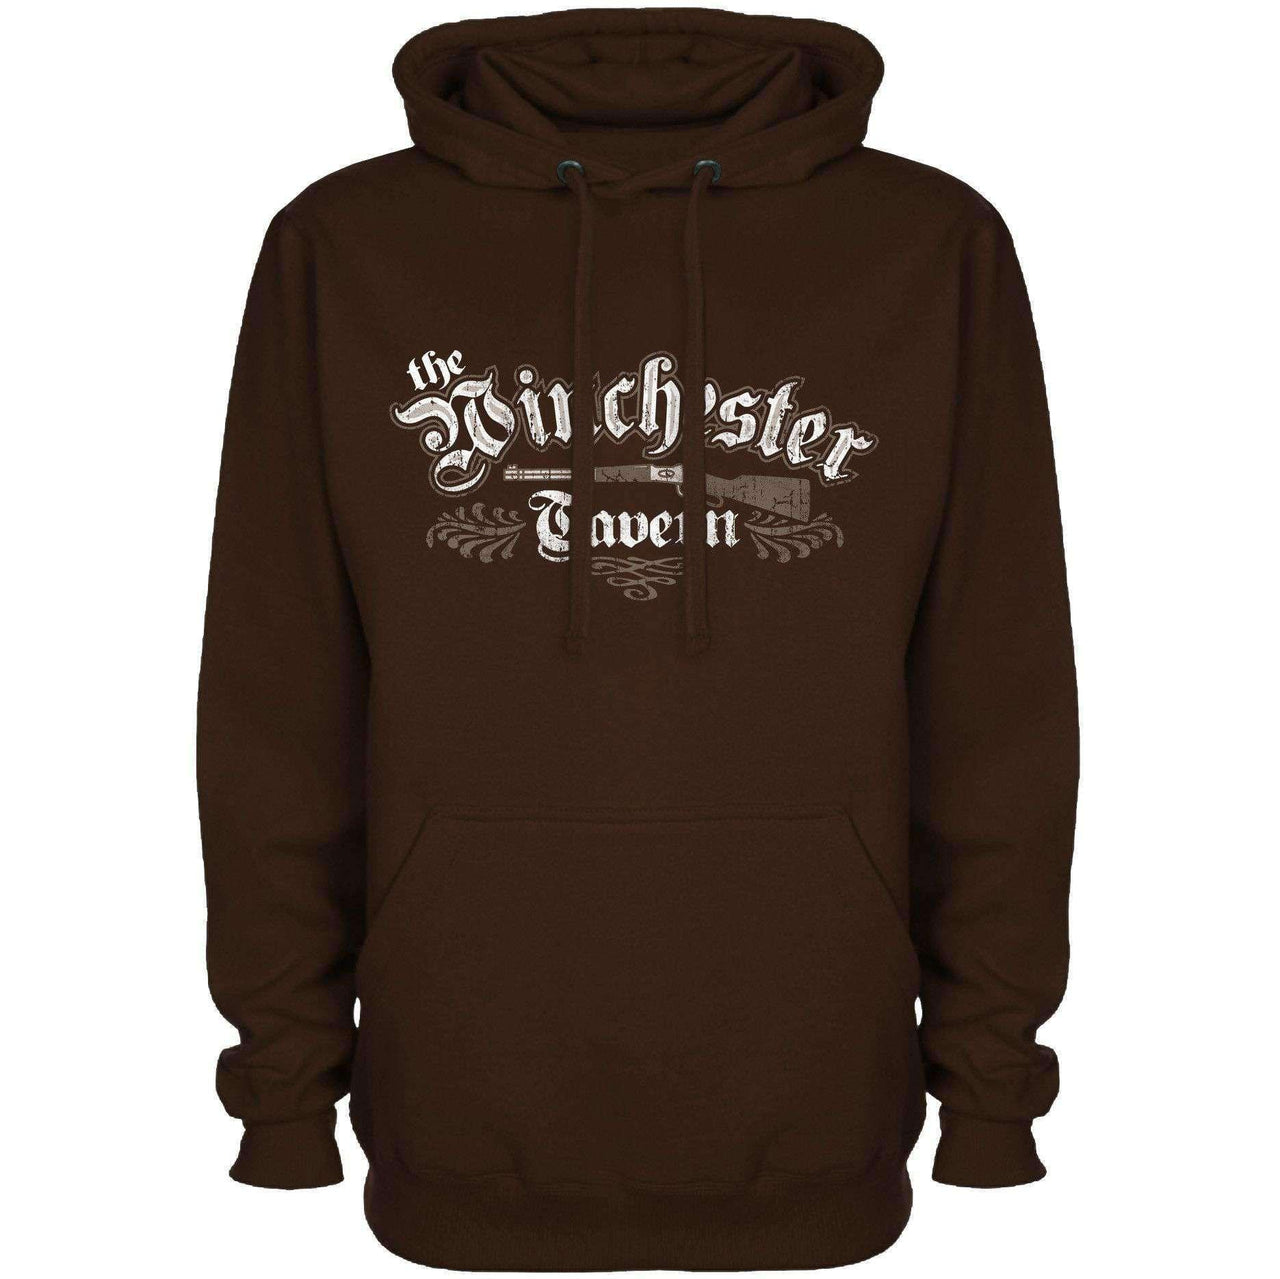 The Winchester Tavern Hoodie For Men and Women 8Ball